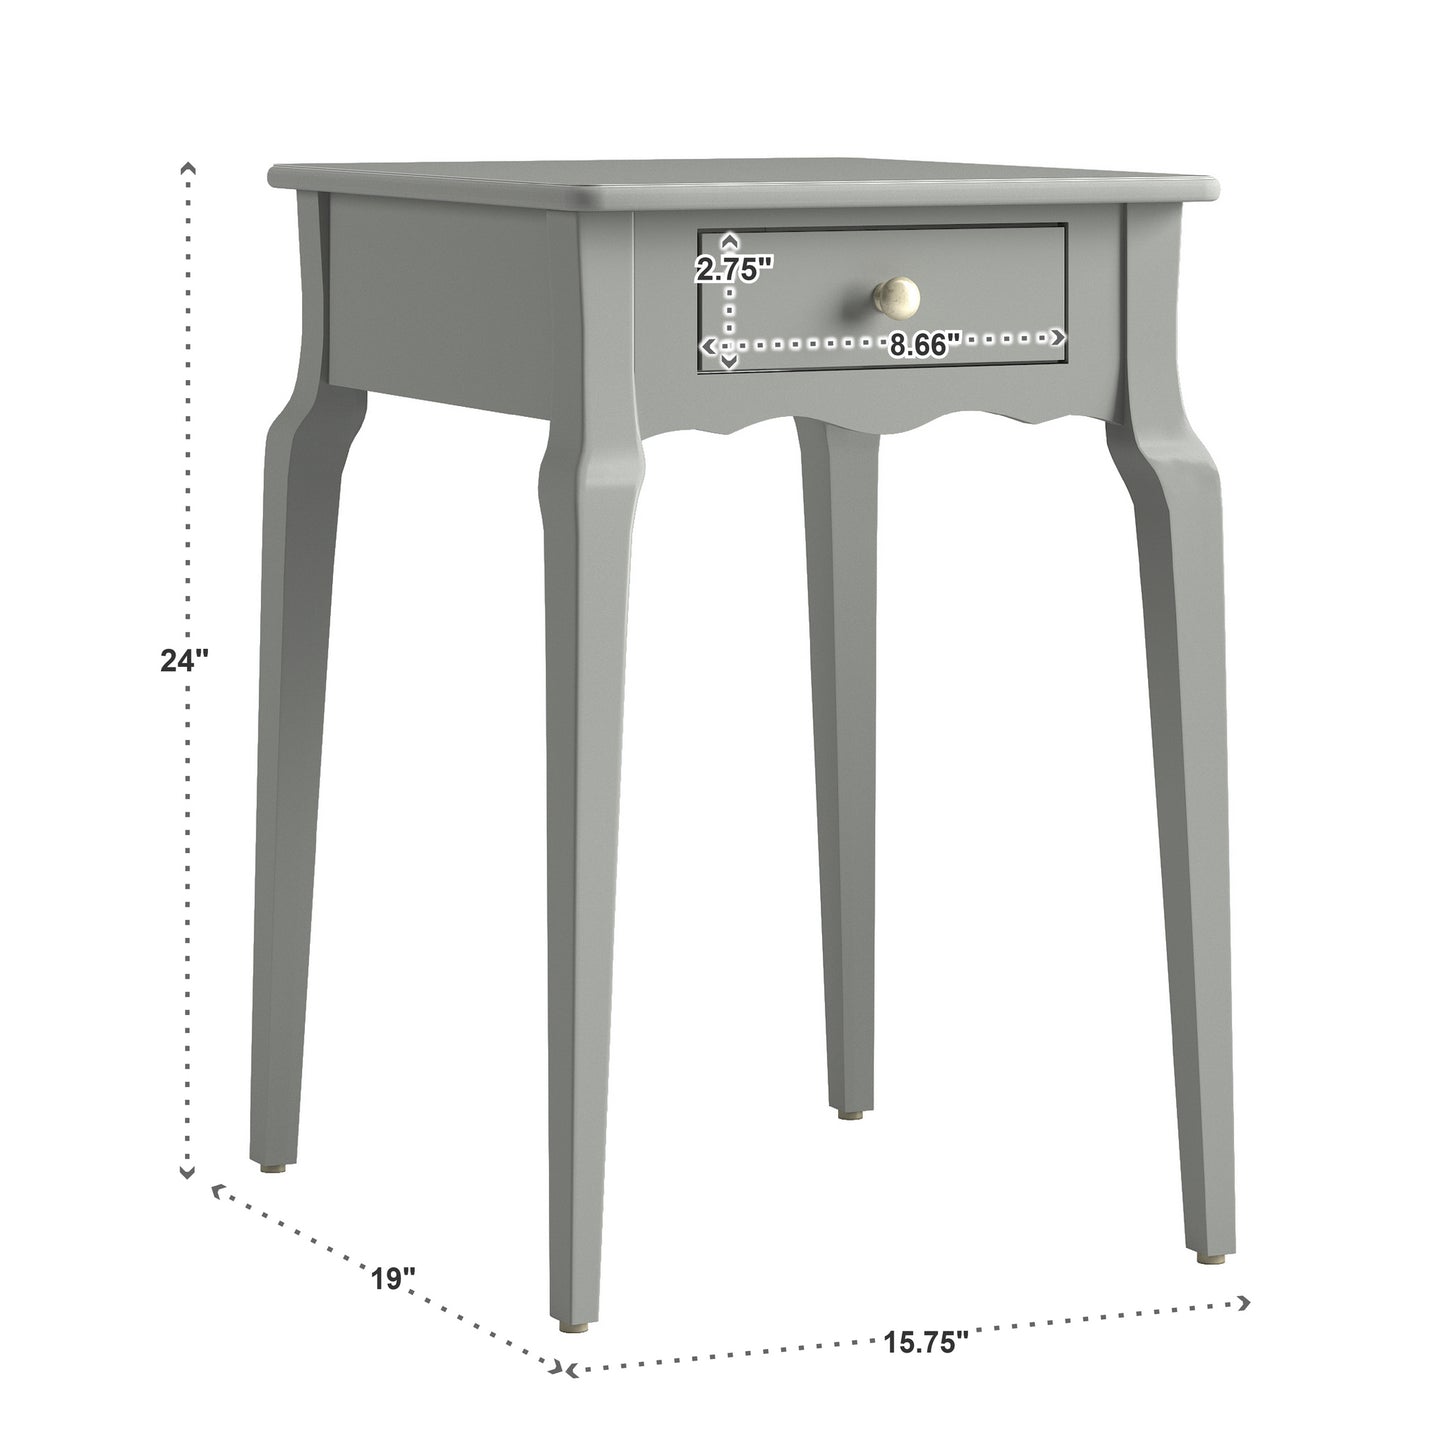 1-Drawer Wood Side Table - Grey